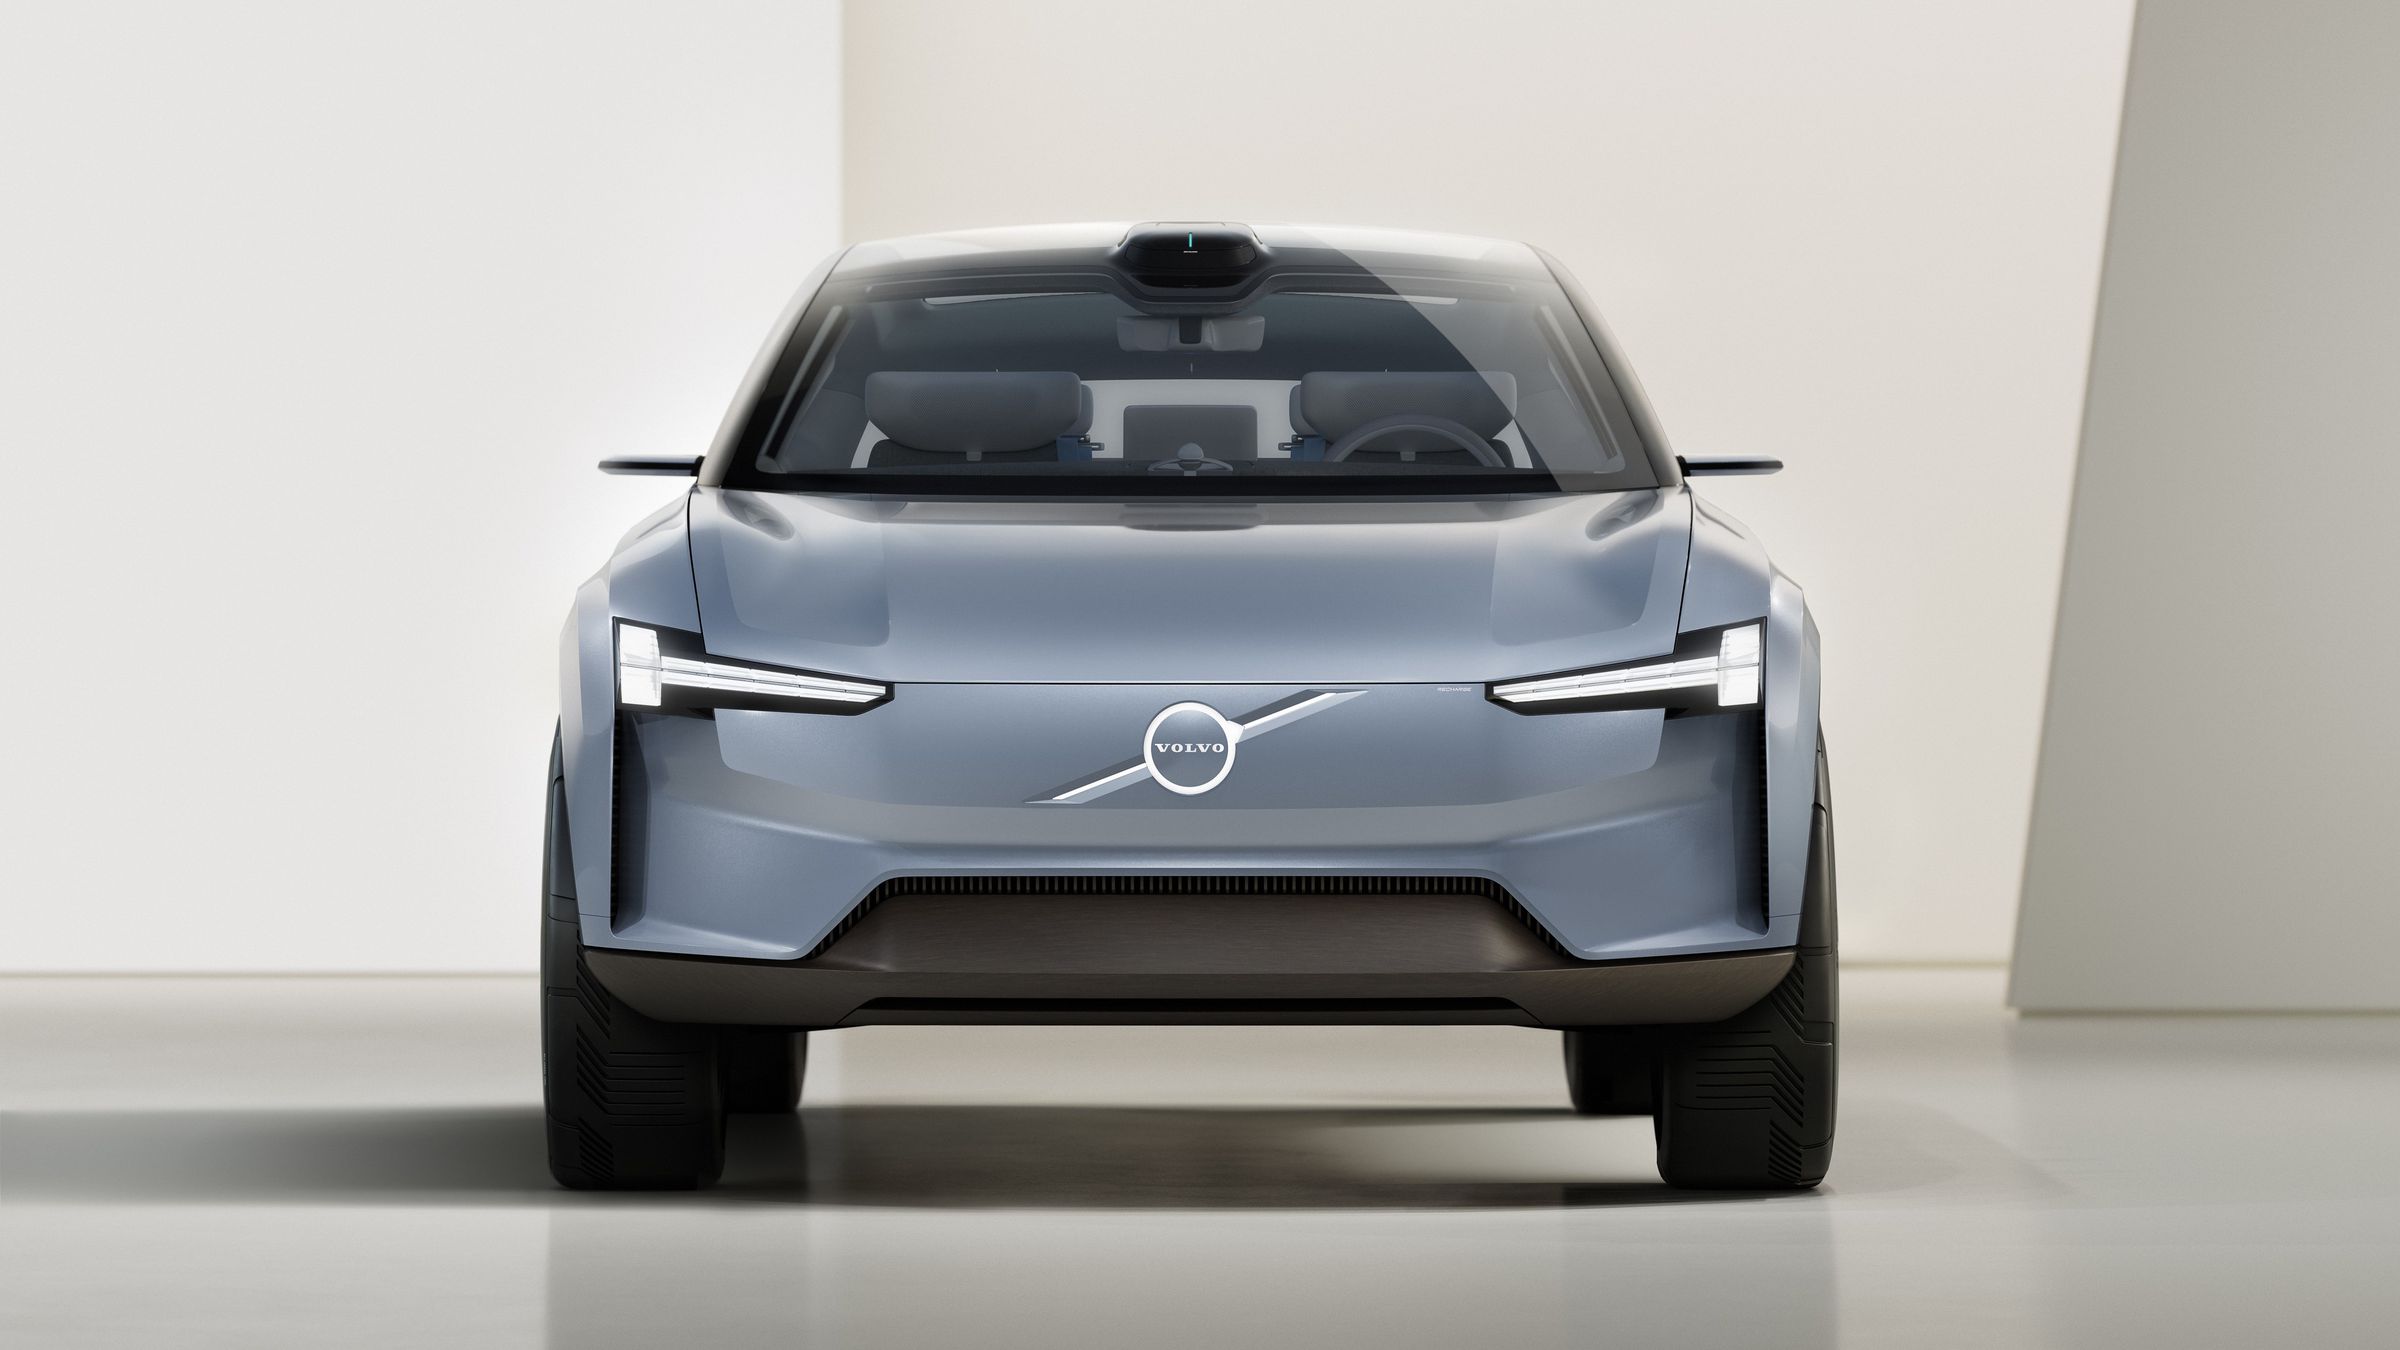 Volvo’s Concept Recharge is a rendering of a gray electric vehicle with the Volvo badge.